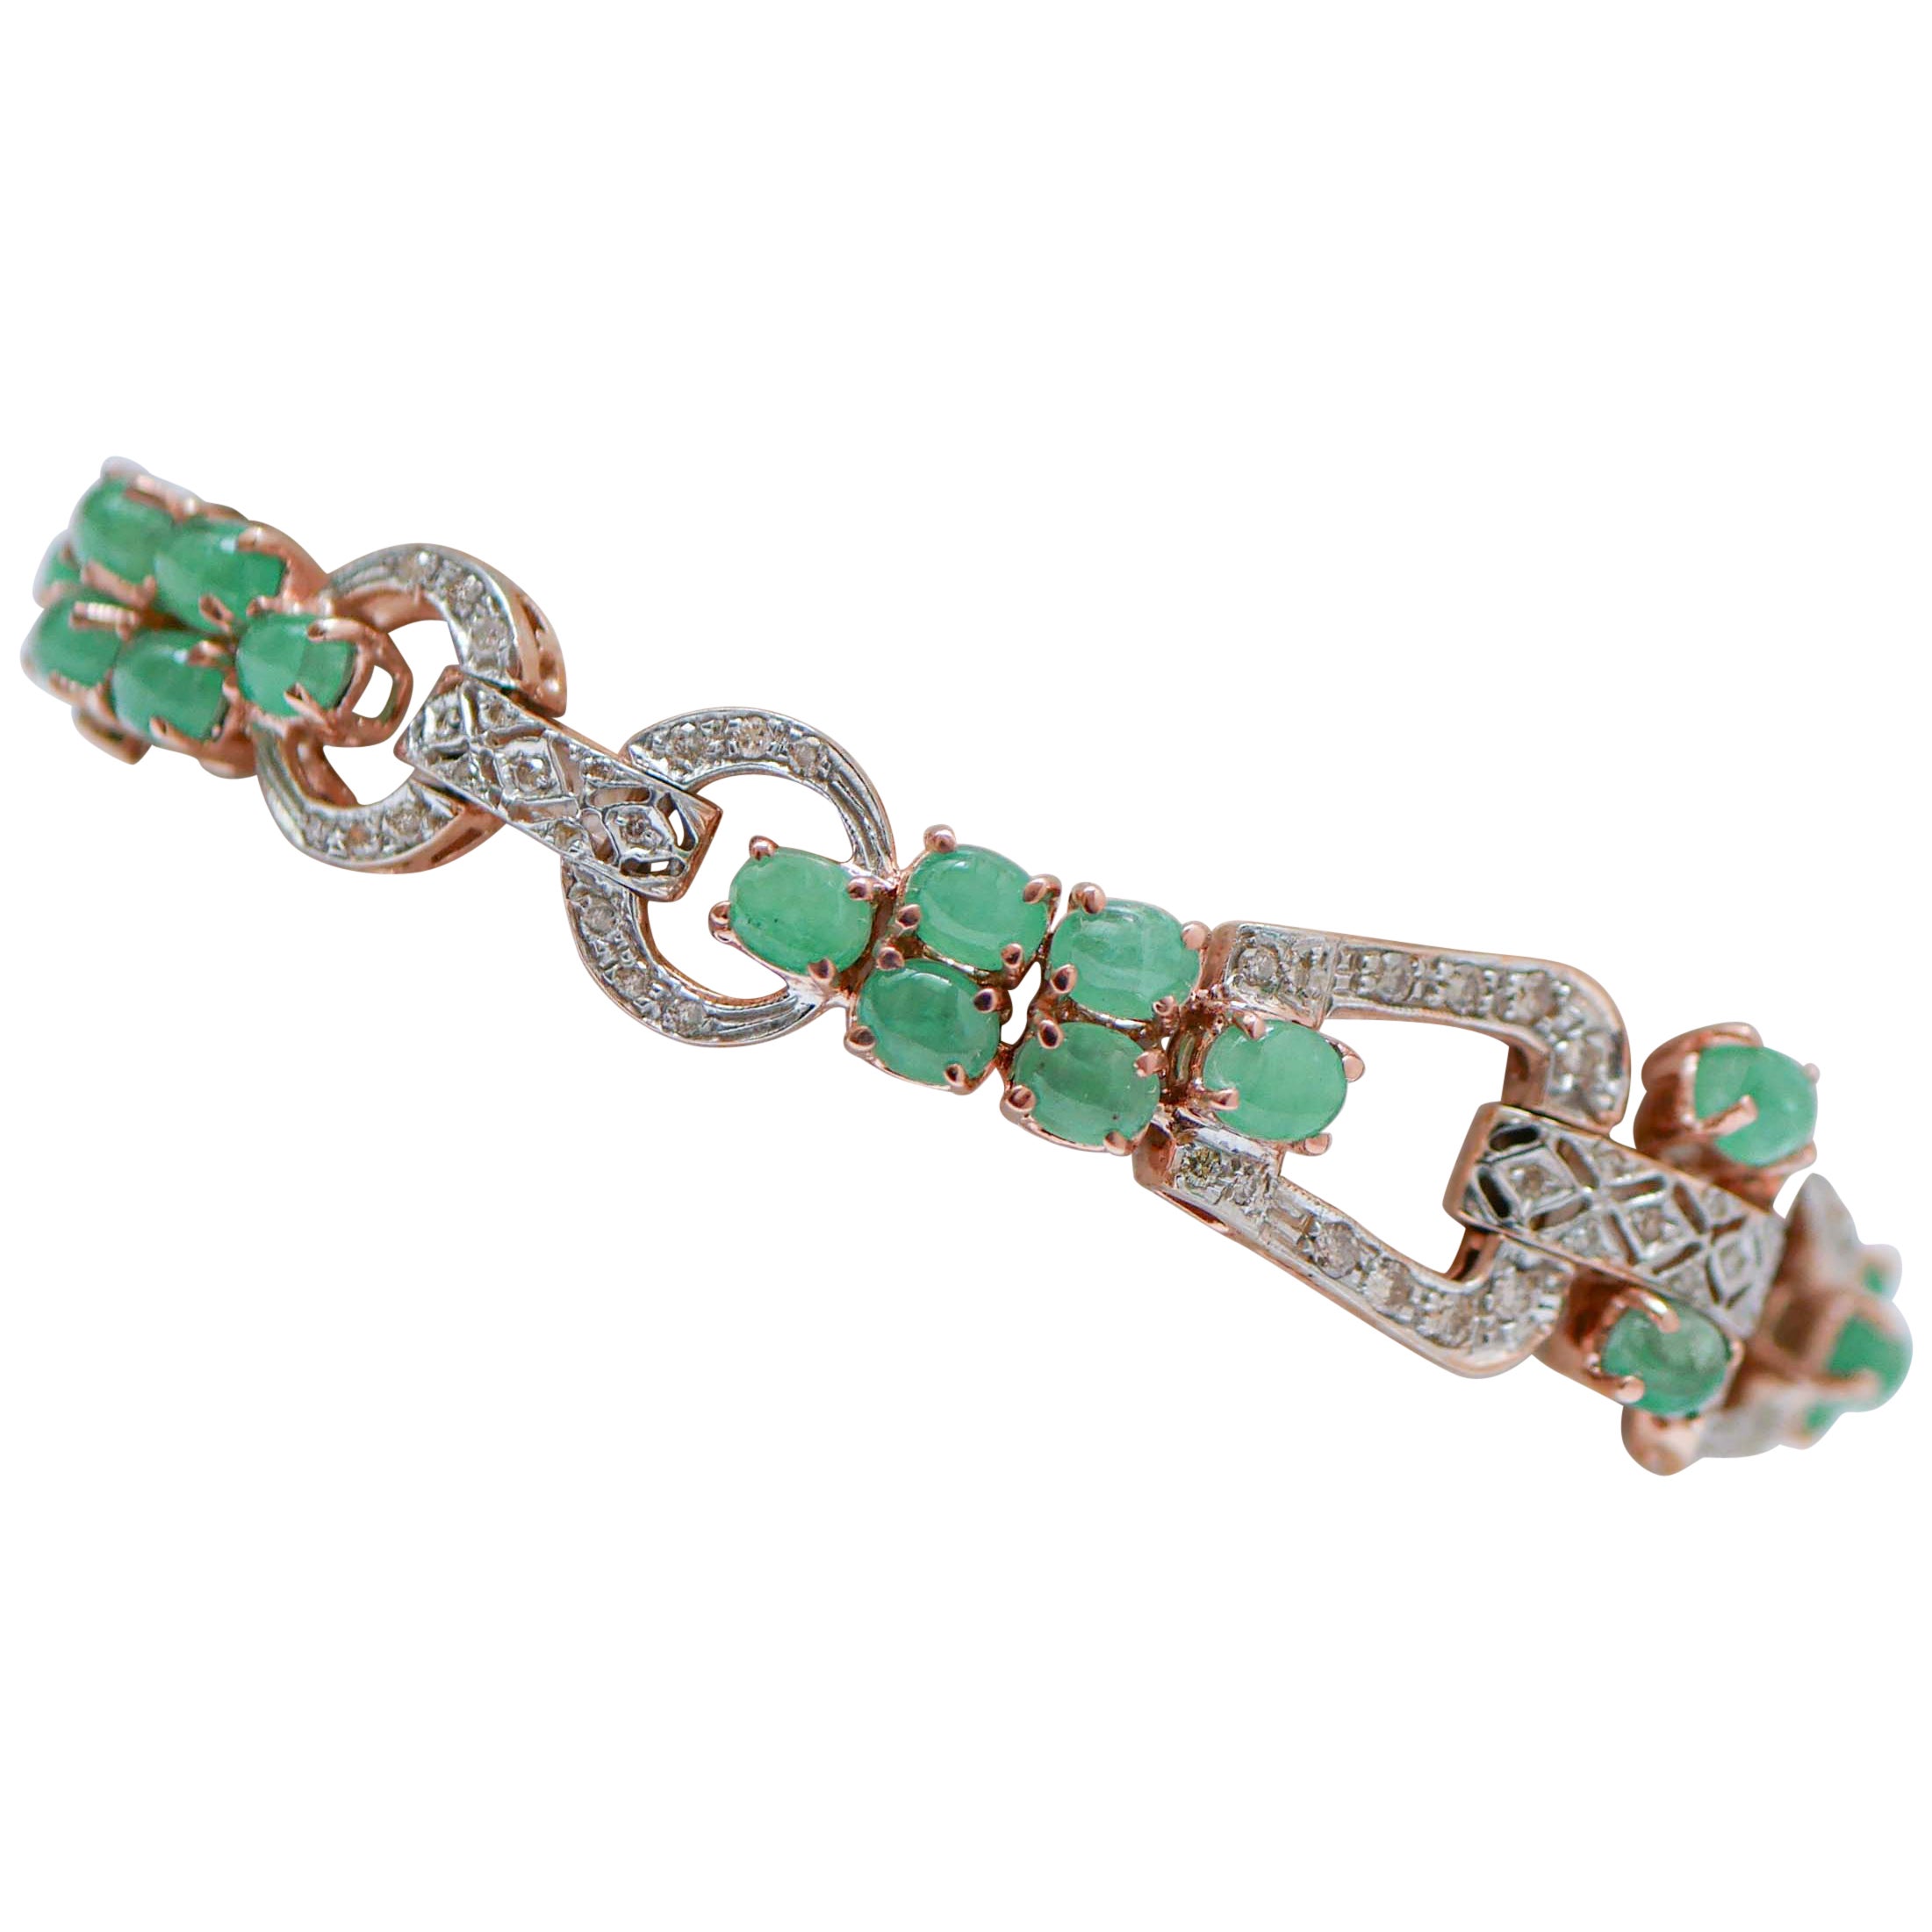 Emeralds, Diamonds, Rose Gold and Silver Bracelet. For Sale